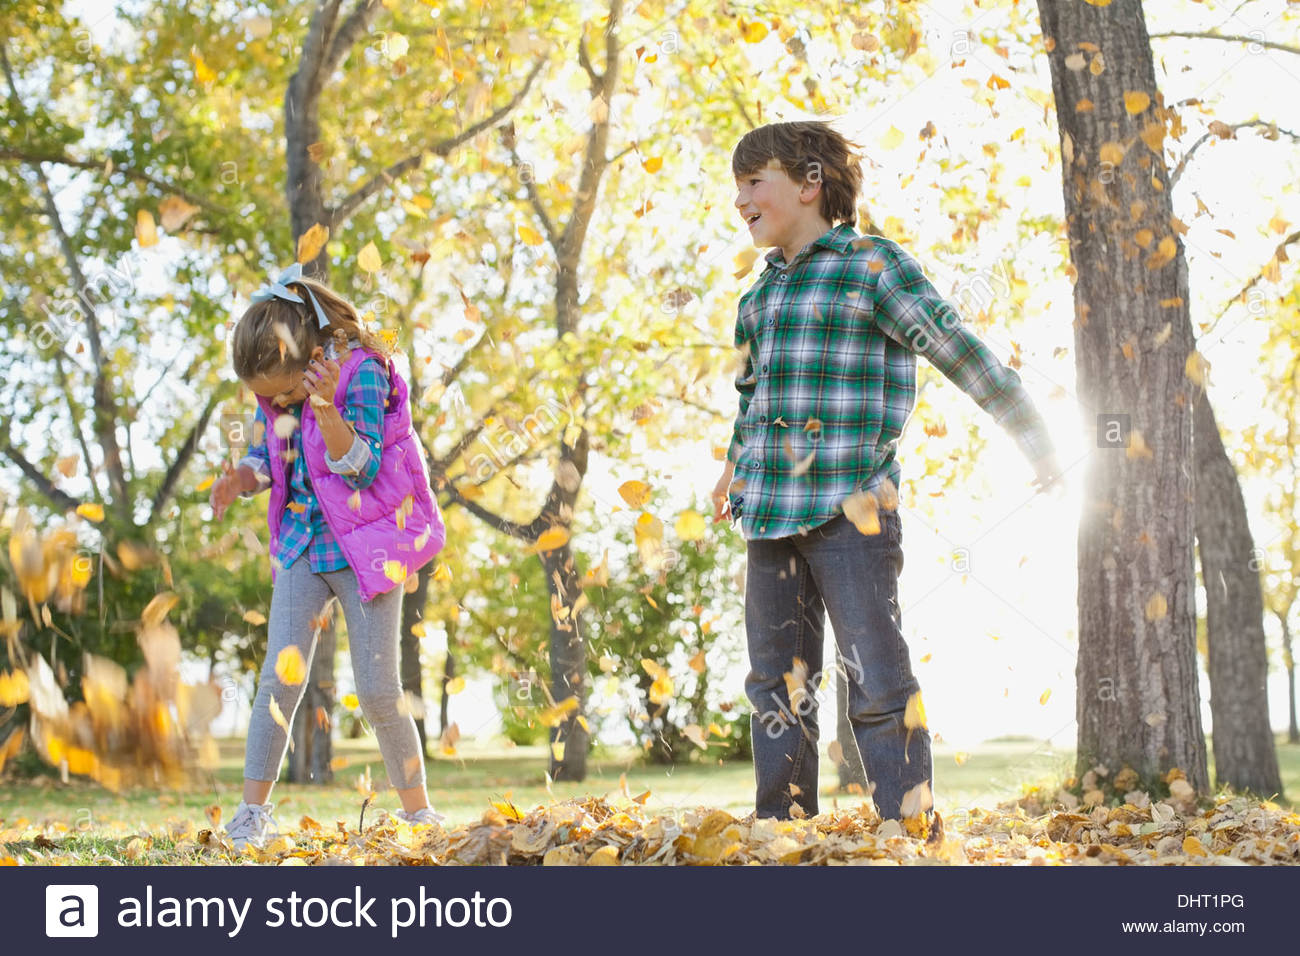 Full length of happy children playing with autumn leaves in park Stock Photo